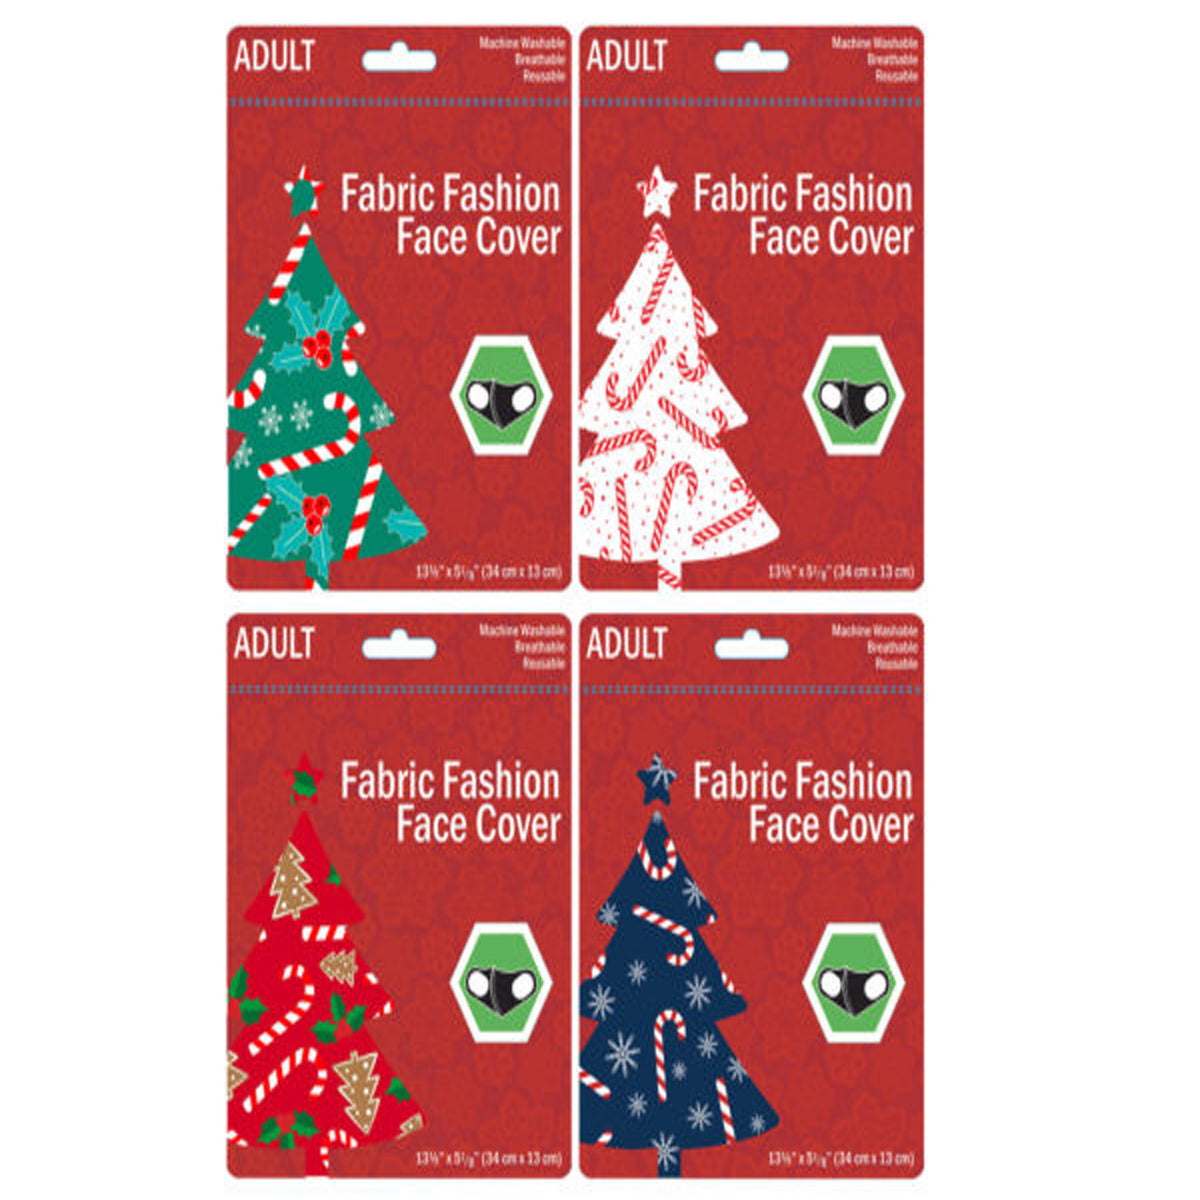 Kids 4 Asst Christmas Washable Face Masks - Spread Holiday Cheer with Festive Protection MOQ -100 pcs